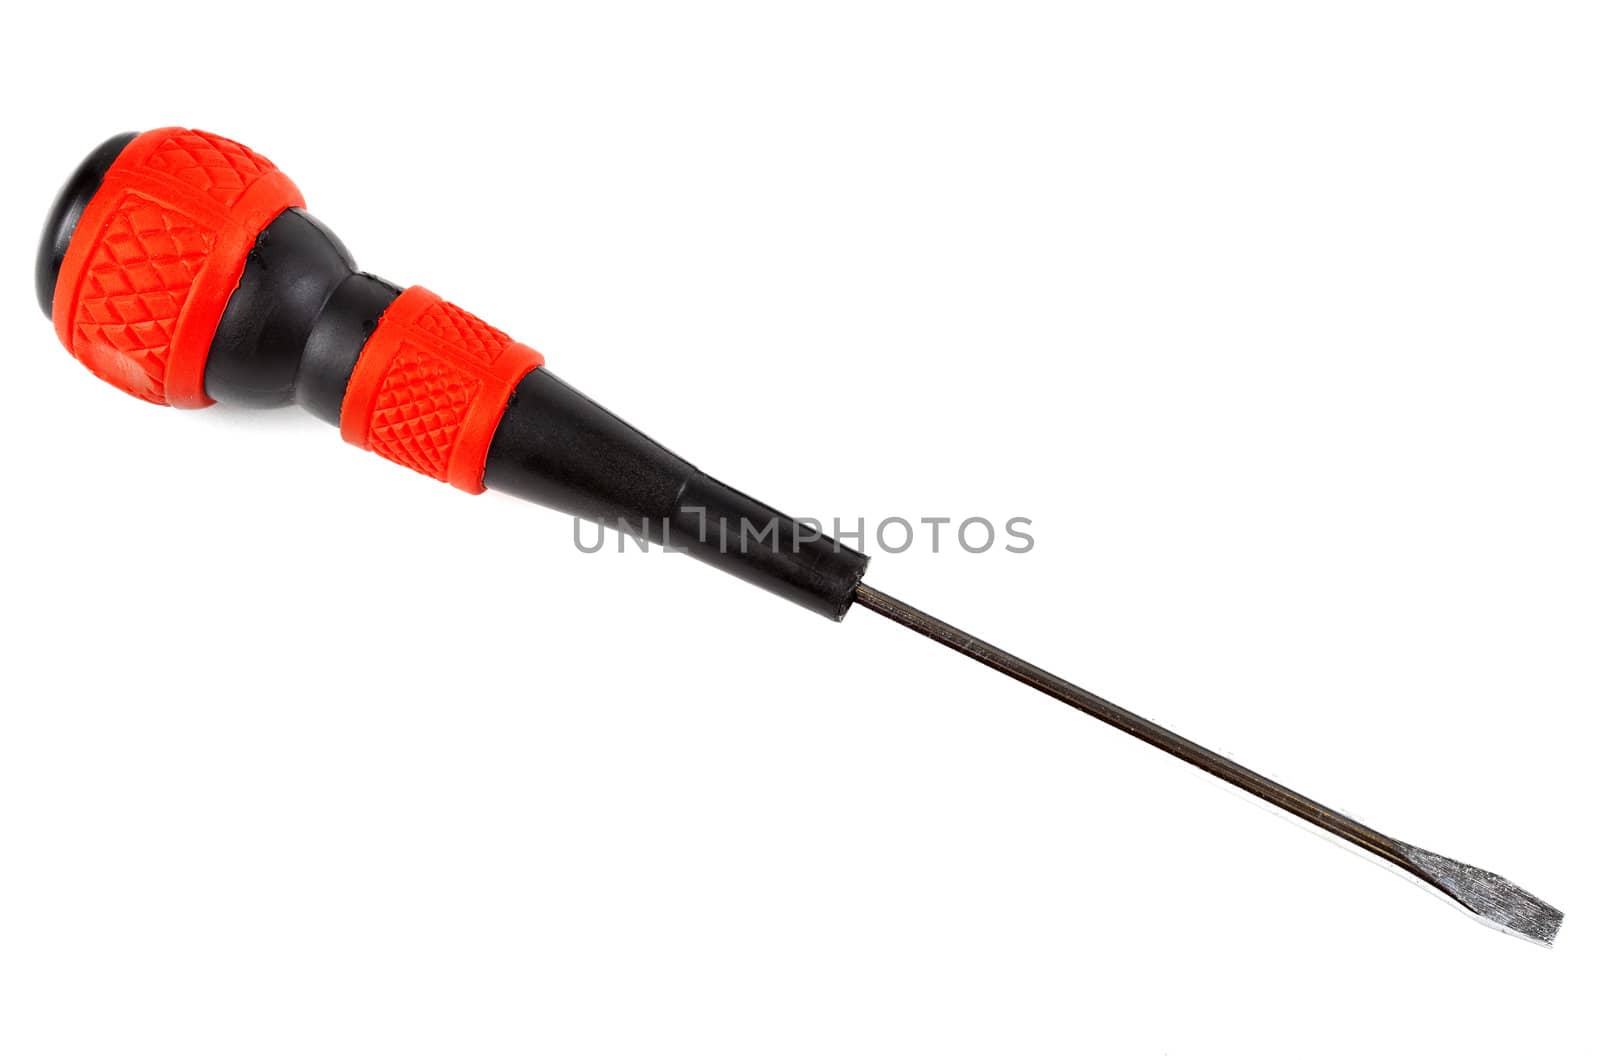 A screwdriver over a white background.